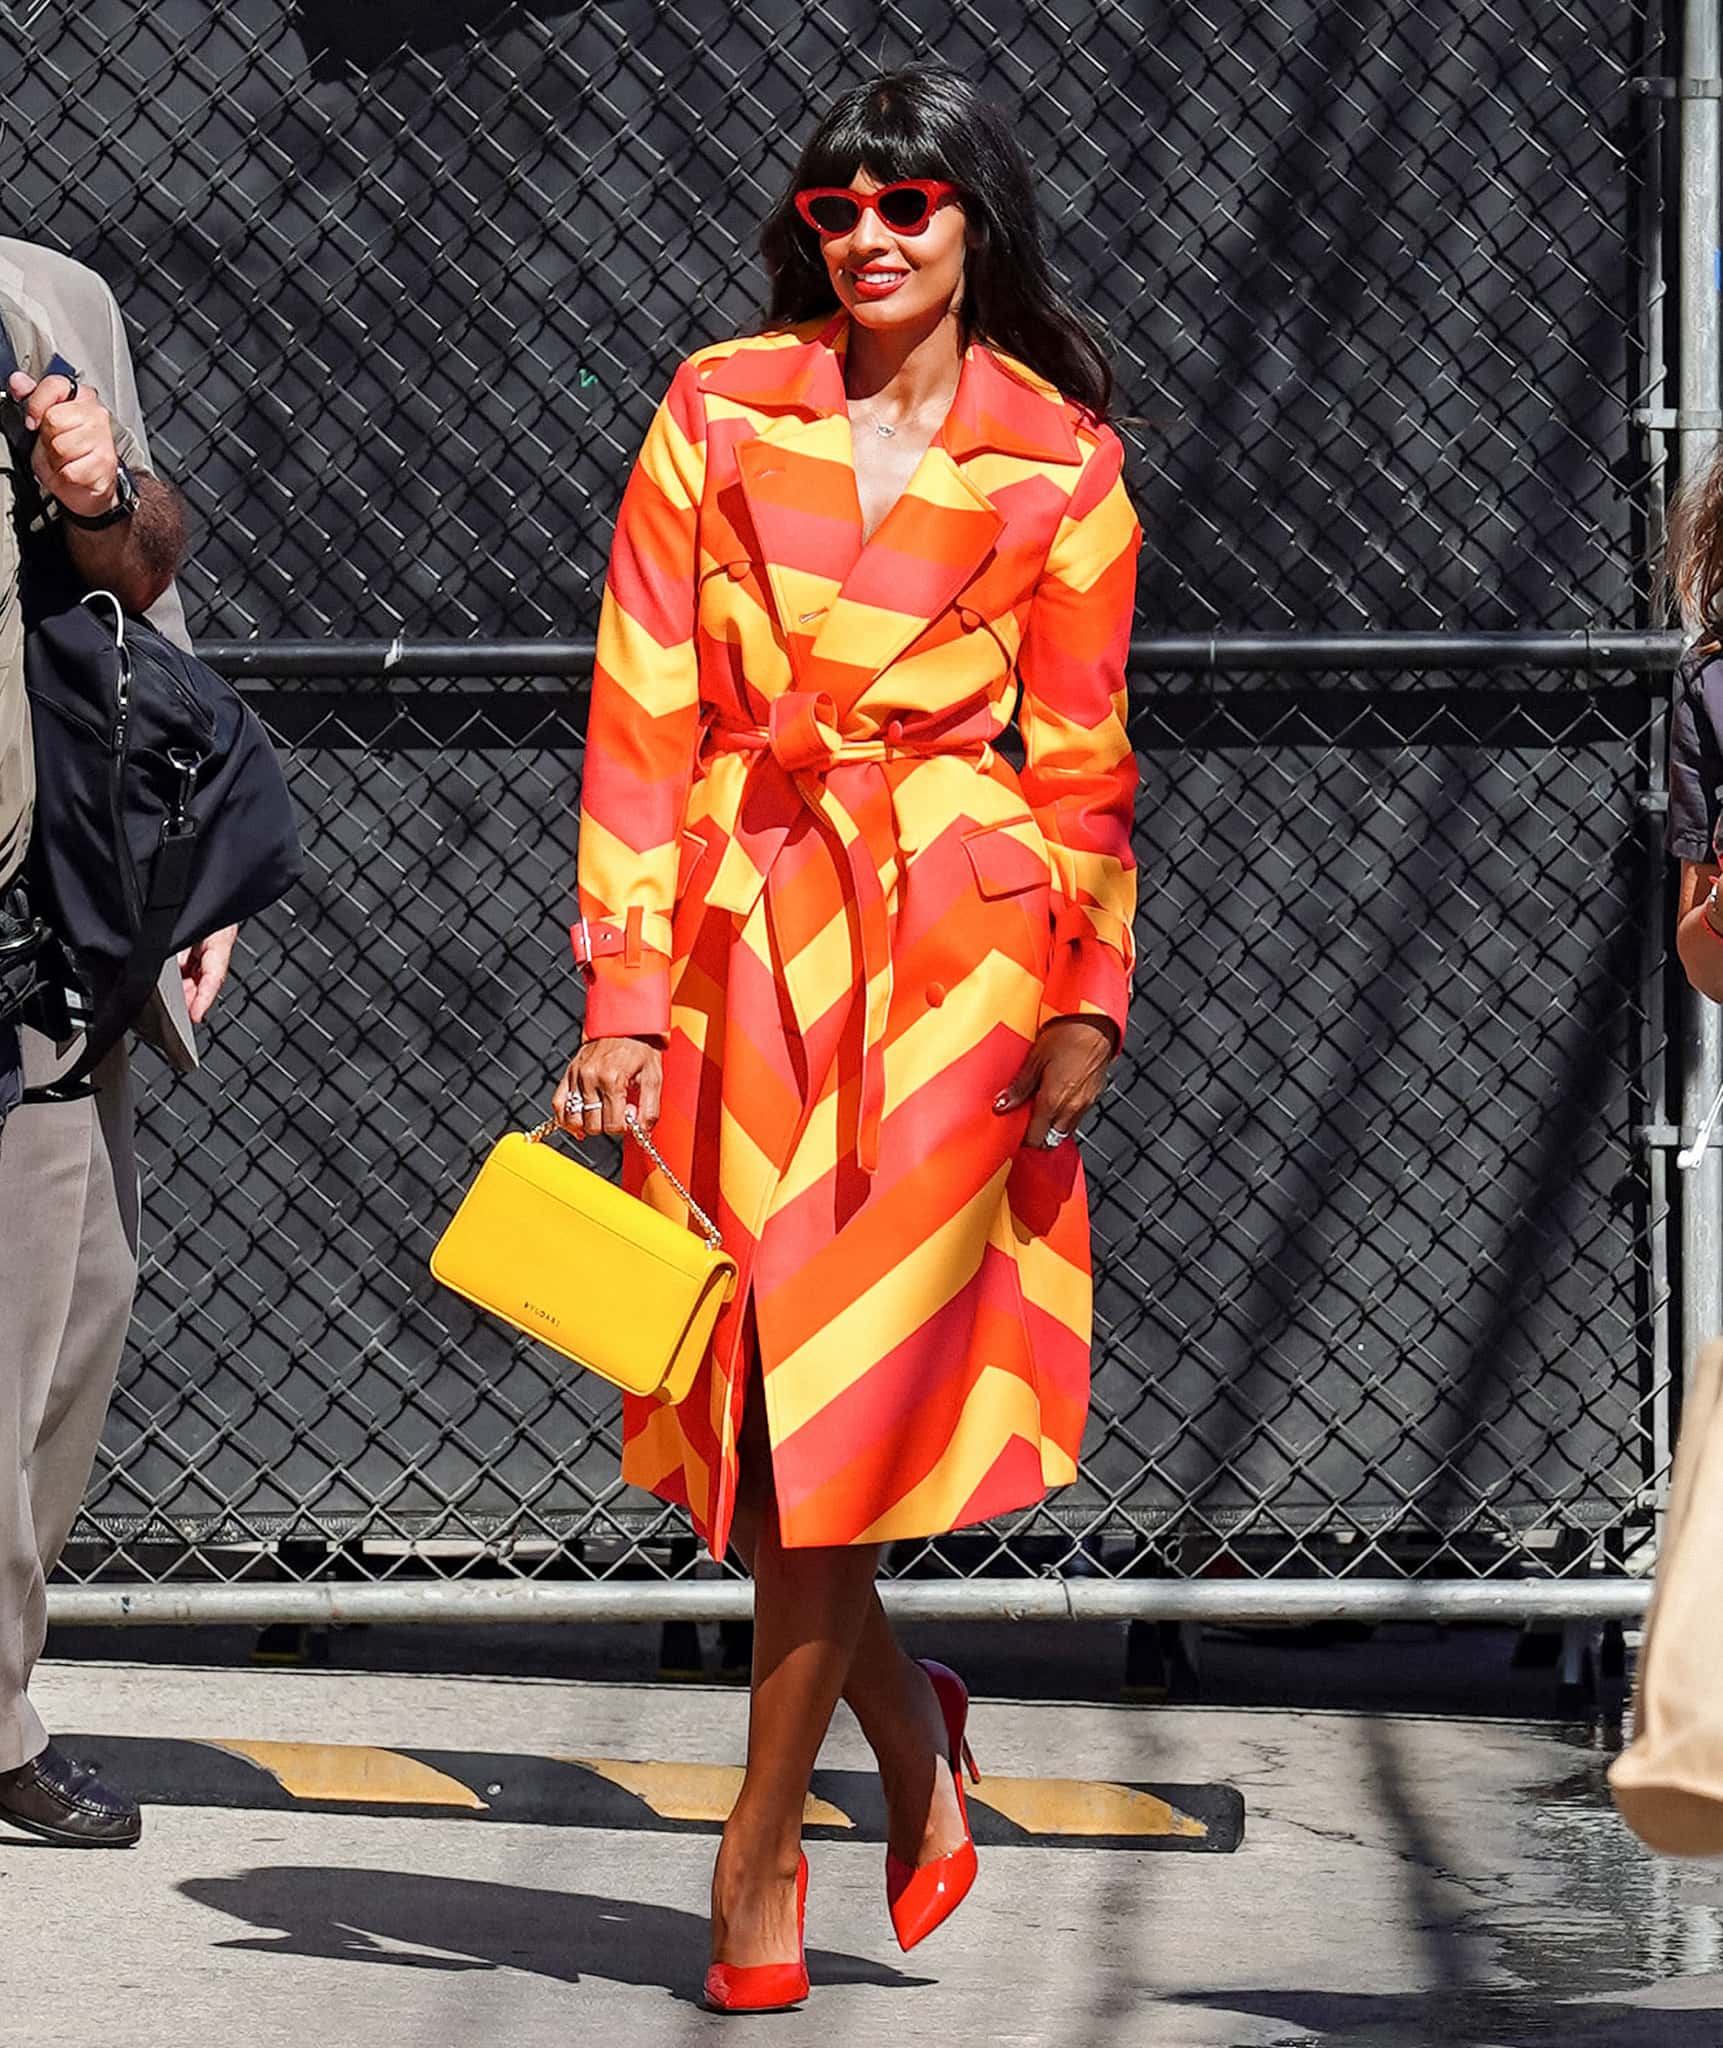 Jameela Jamil looks straight out of a comic book in a red, orange, and yellow chevron trench coat by Gray Scale IC